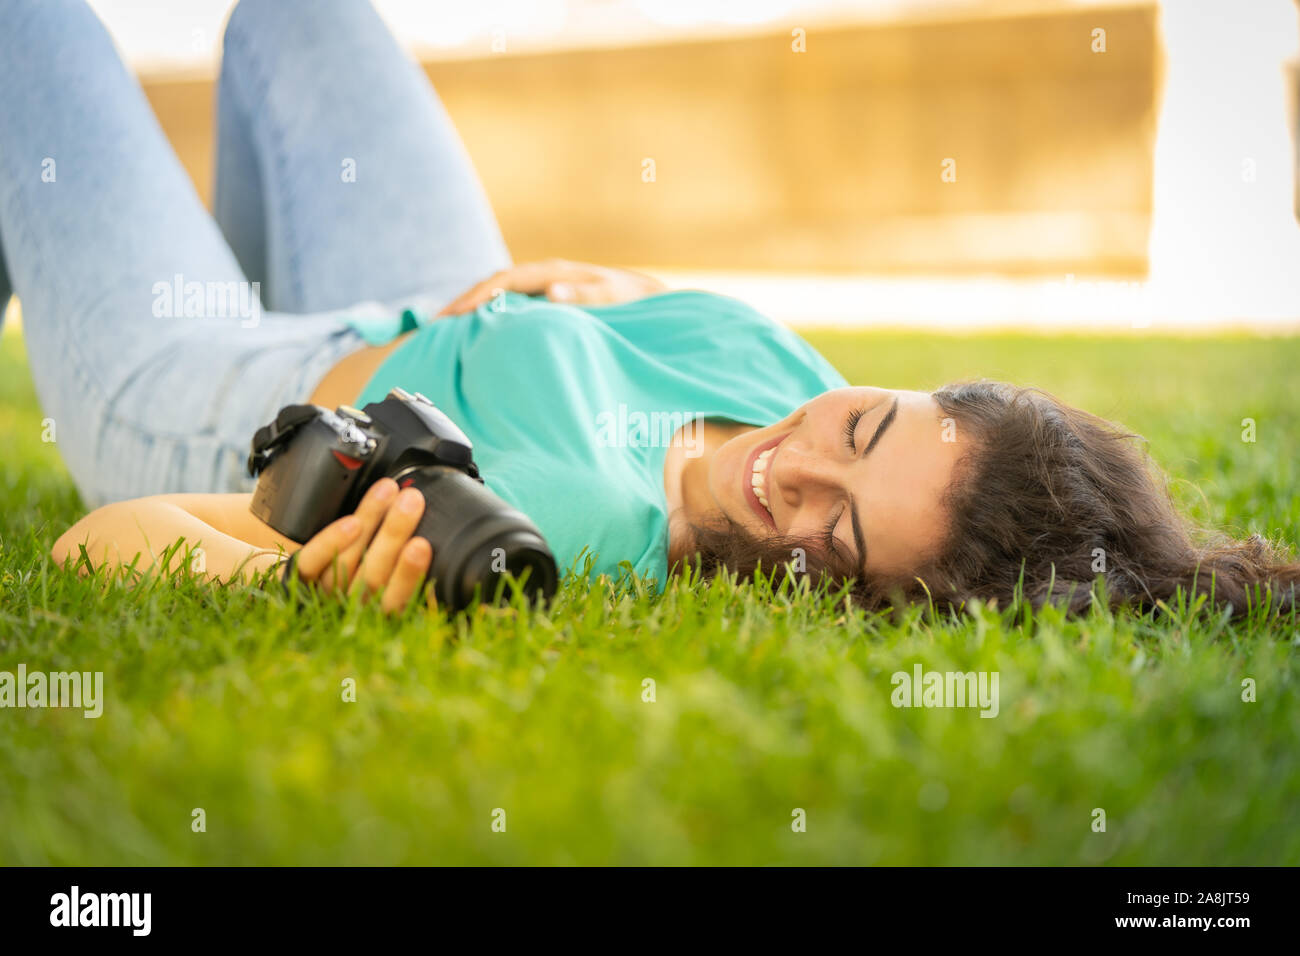 Photographer girl lying on the grass happy and smiling, relaxing Stock Photo